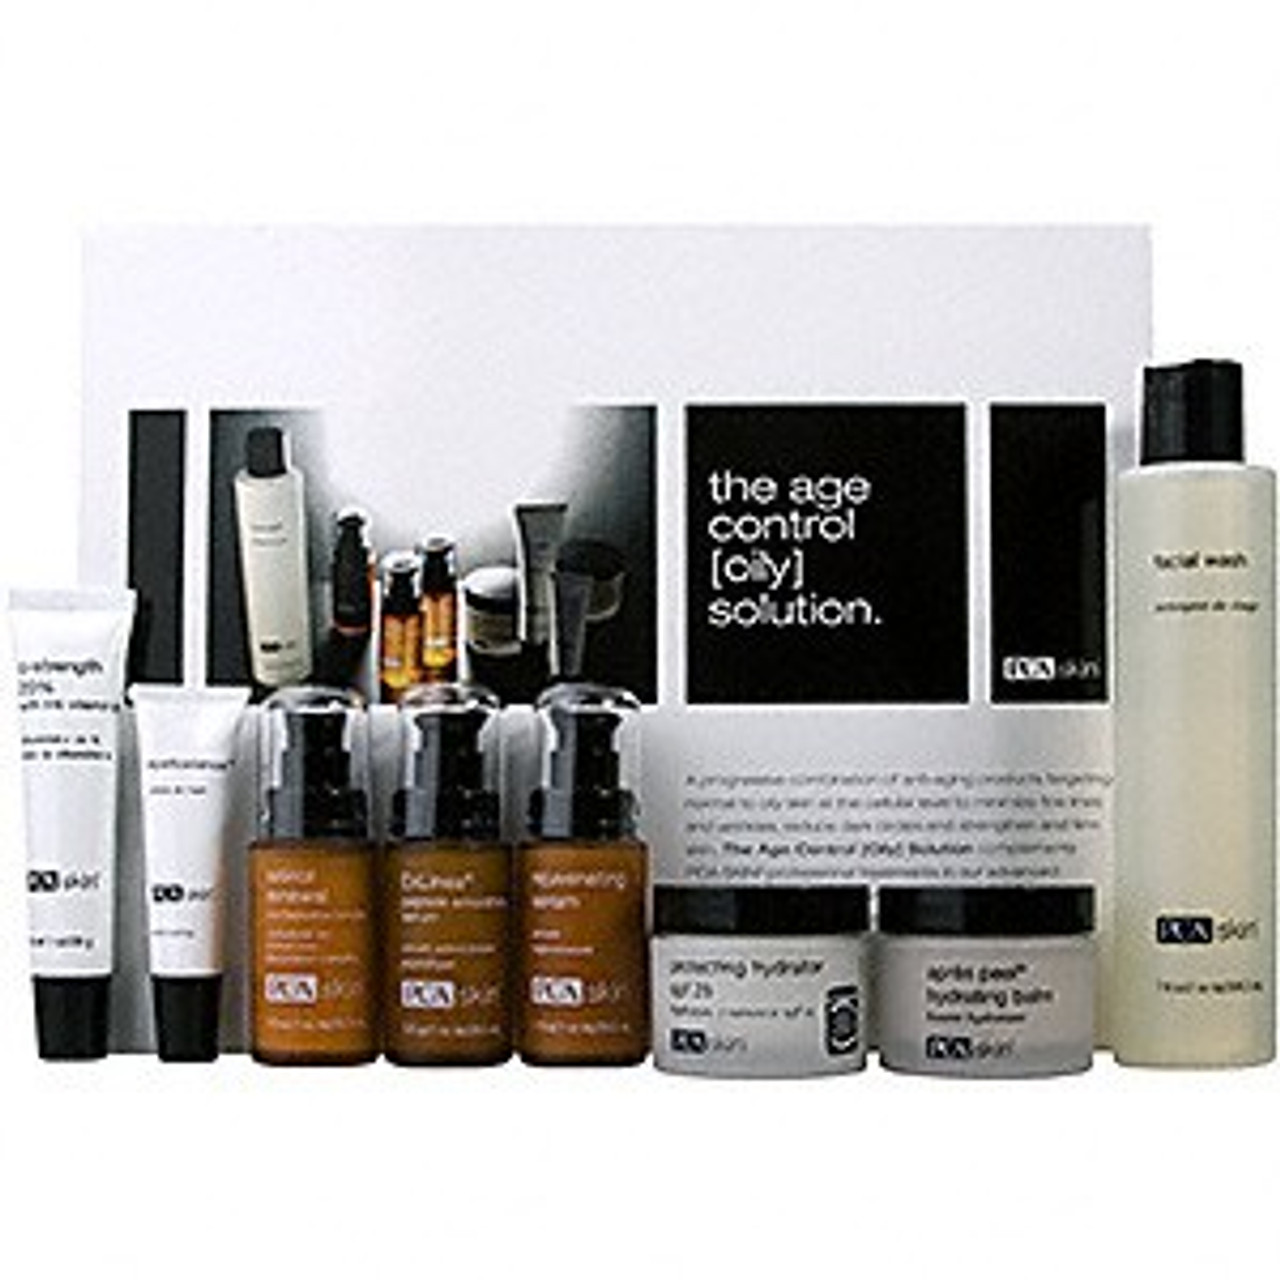 PCA Skin Age Control Oily Solution Kit - Full Size